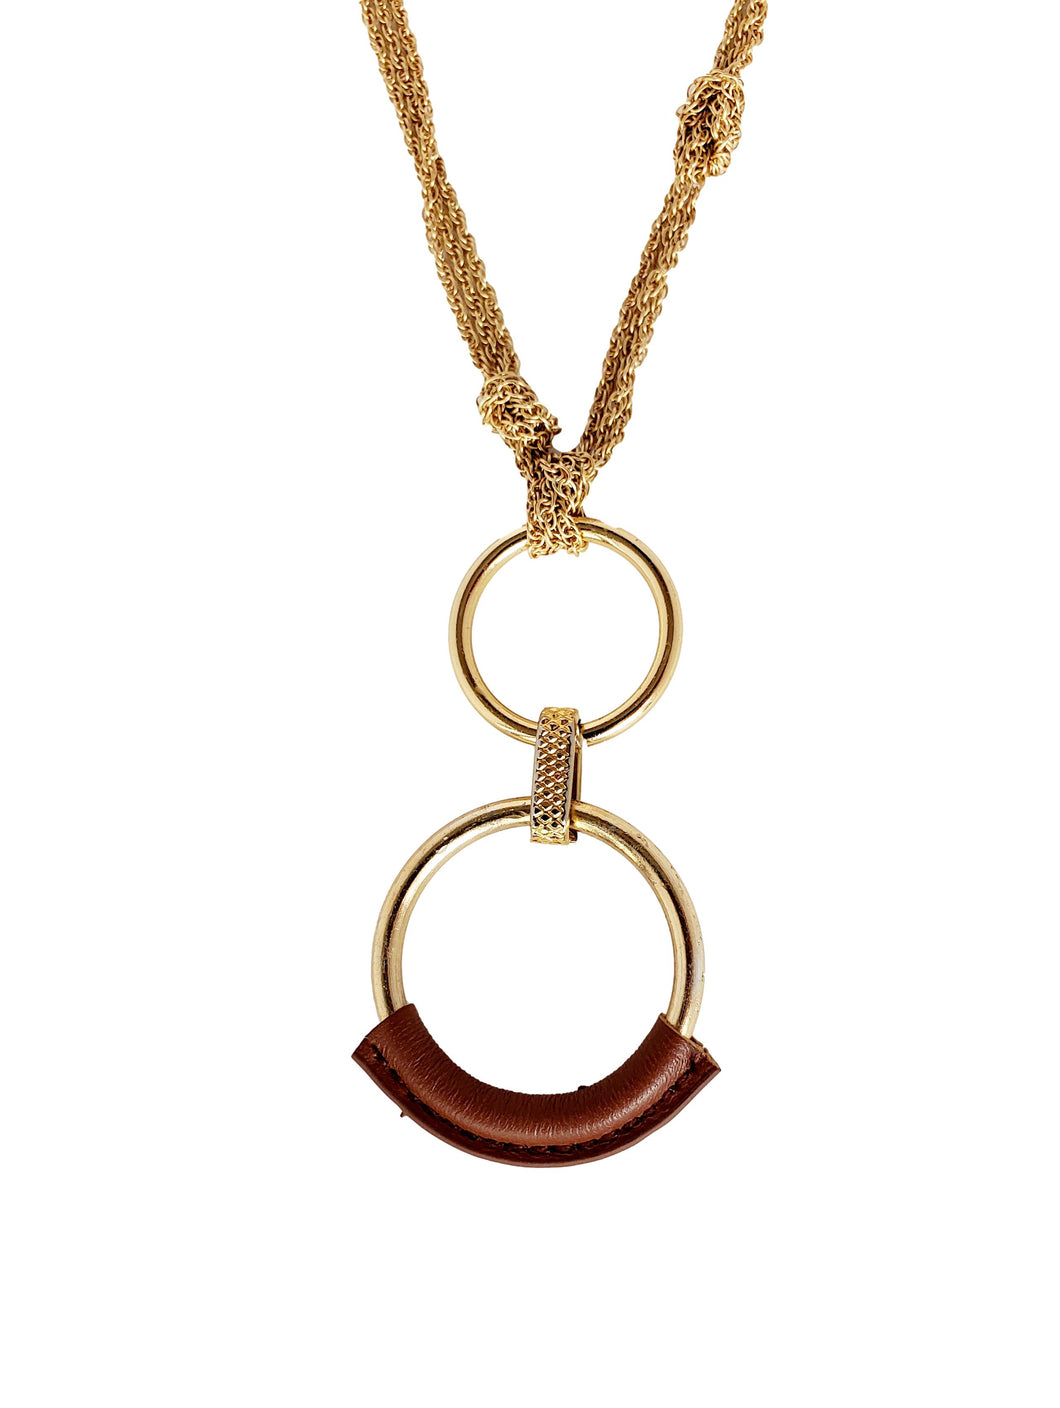 Knotted Gold Tone Chain Necklace with Eternity Circle Pendant Wrapped in Brown Leather